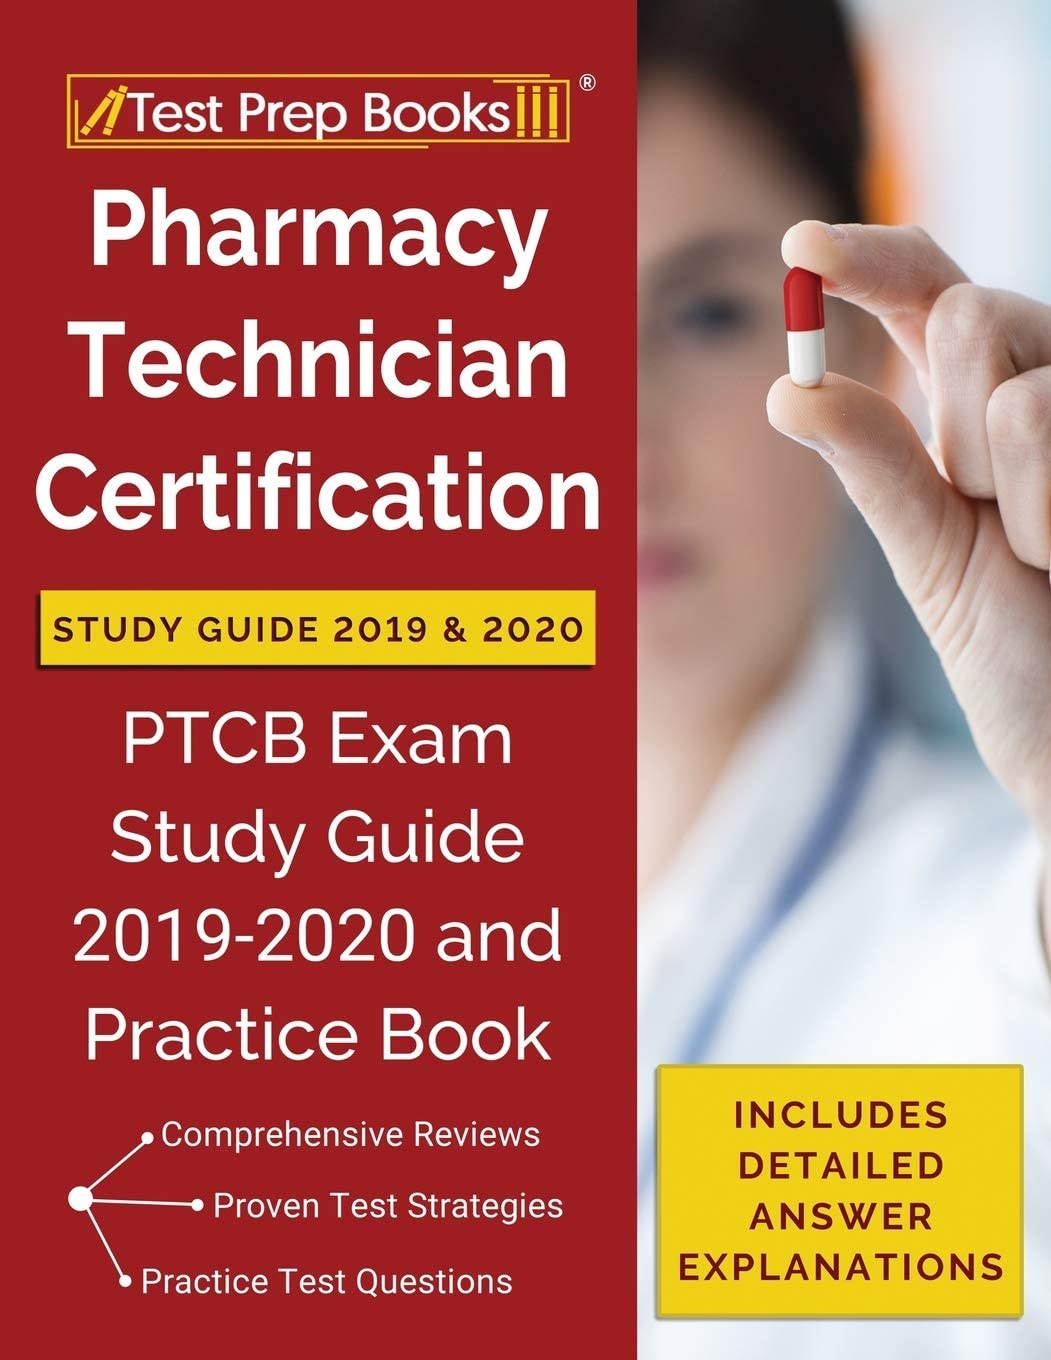 Pharmacy Technician Certification Study Guide 2019 & 2020: PTCB Exam Study Guide 2019-2020 and Practice Book [Includes Detailed Answer Explanations]